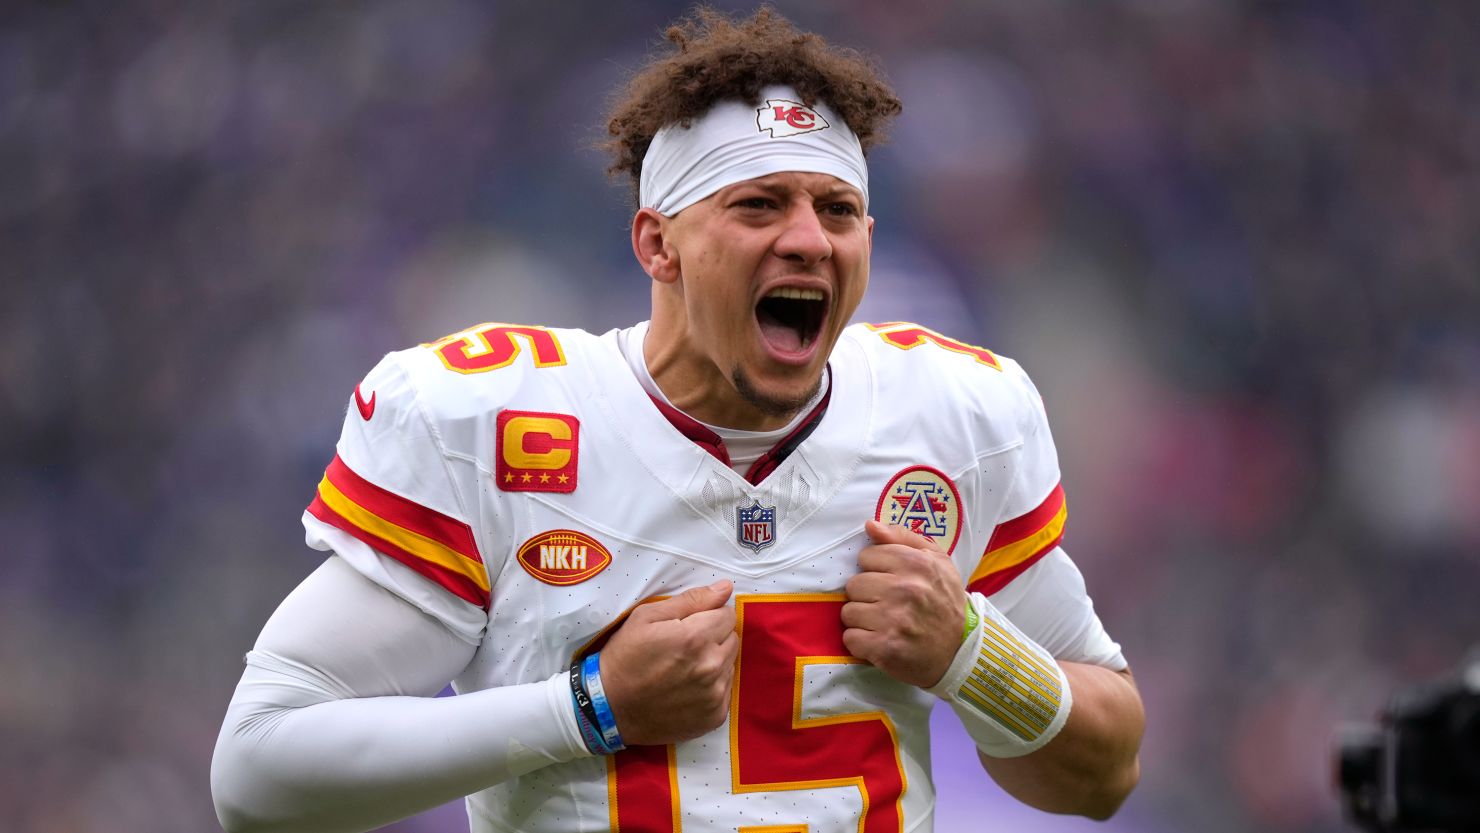 Mahomes has already established himself as an all-time great.